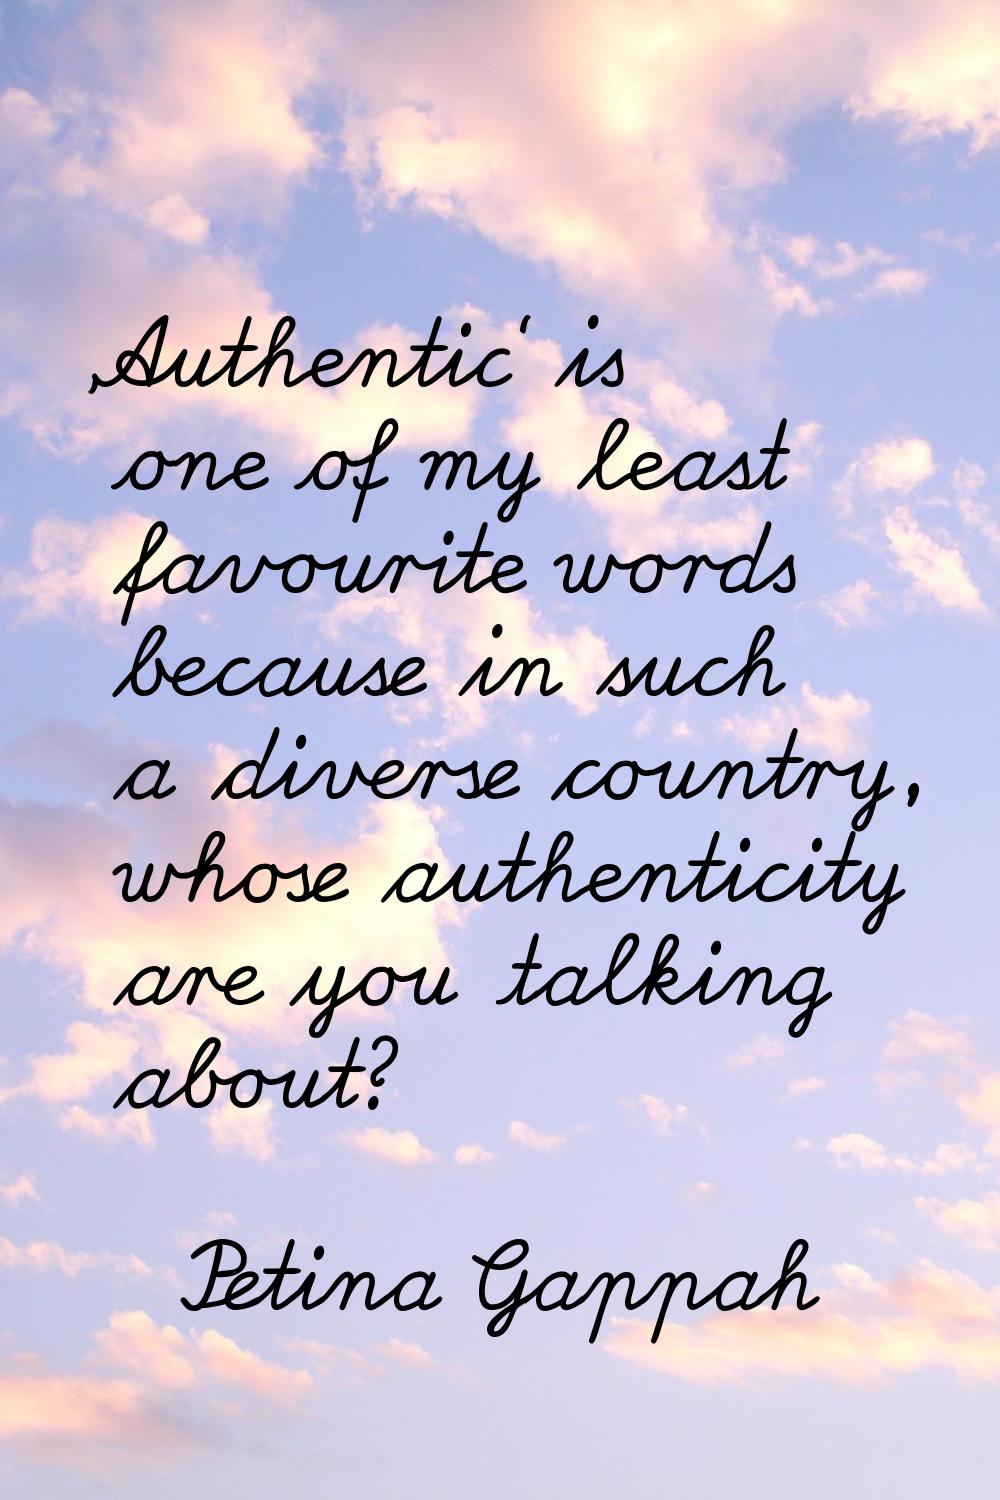 'Authentic' is one of my least favourite words because in such a diverse country, whose authenticit